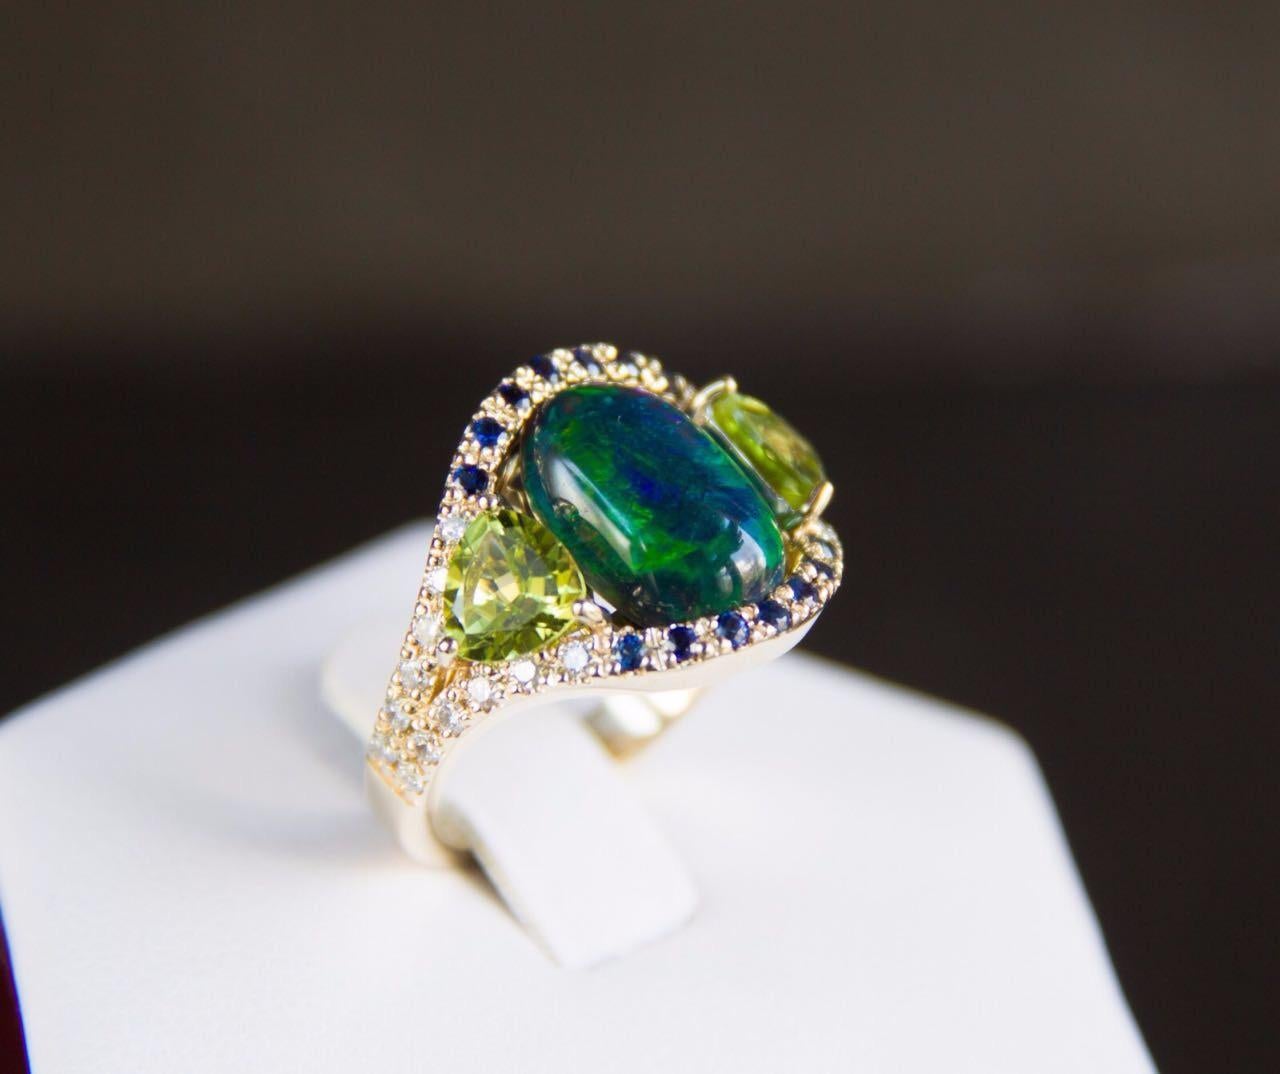 For Sale:  Black Opal, Sapphires, Peridots, Diamonds 14k Gold Ring, Genuine Opal Ring 5